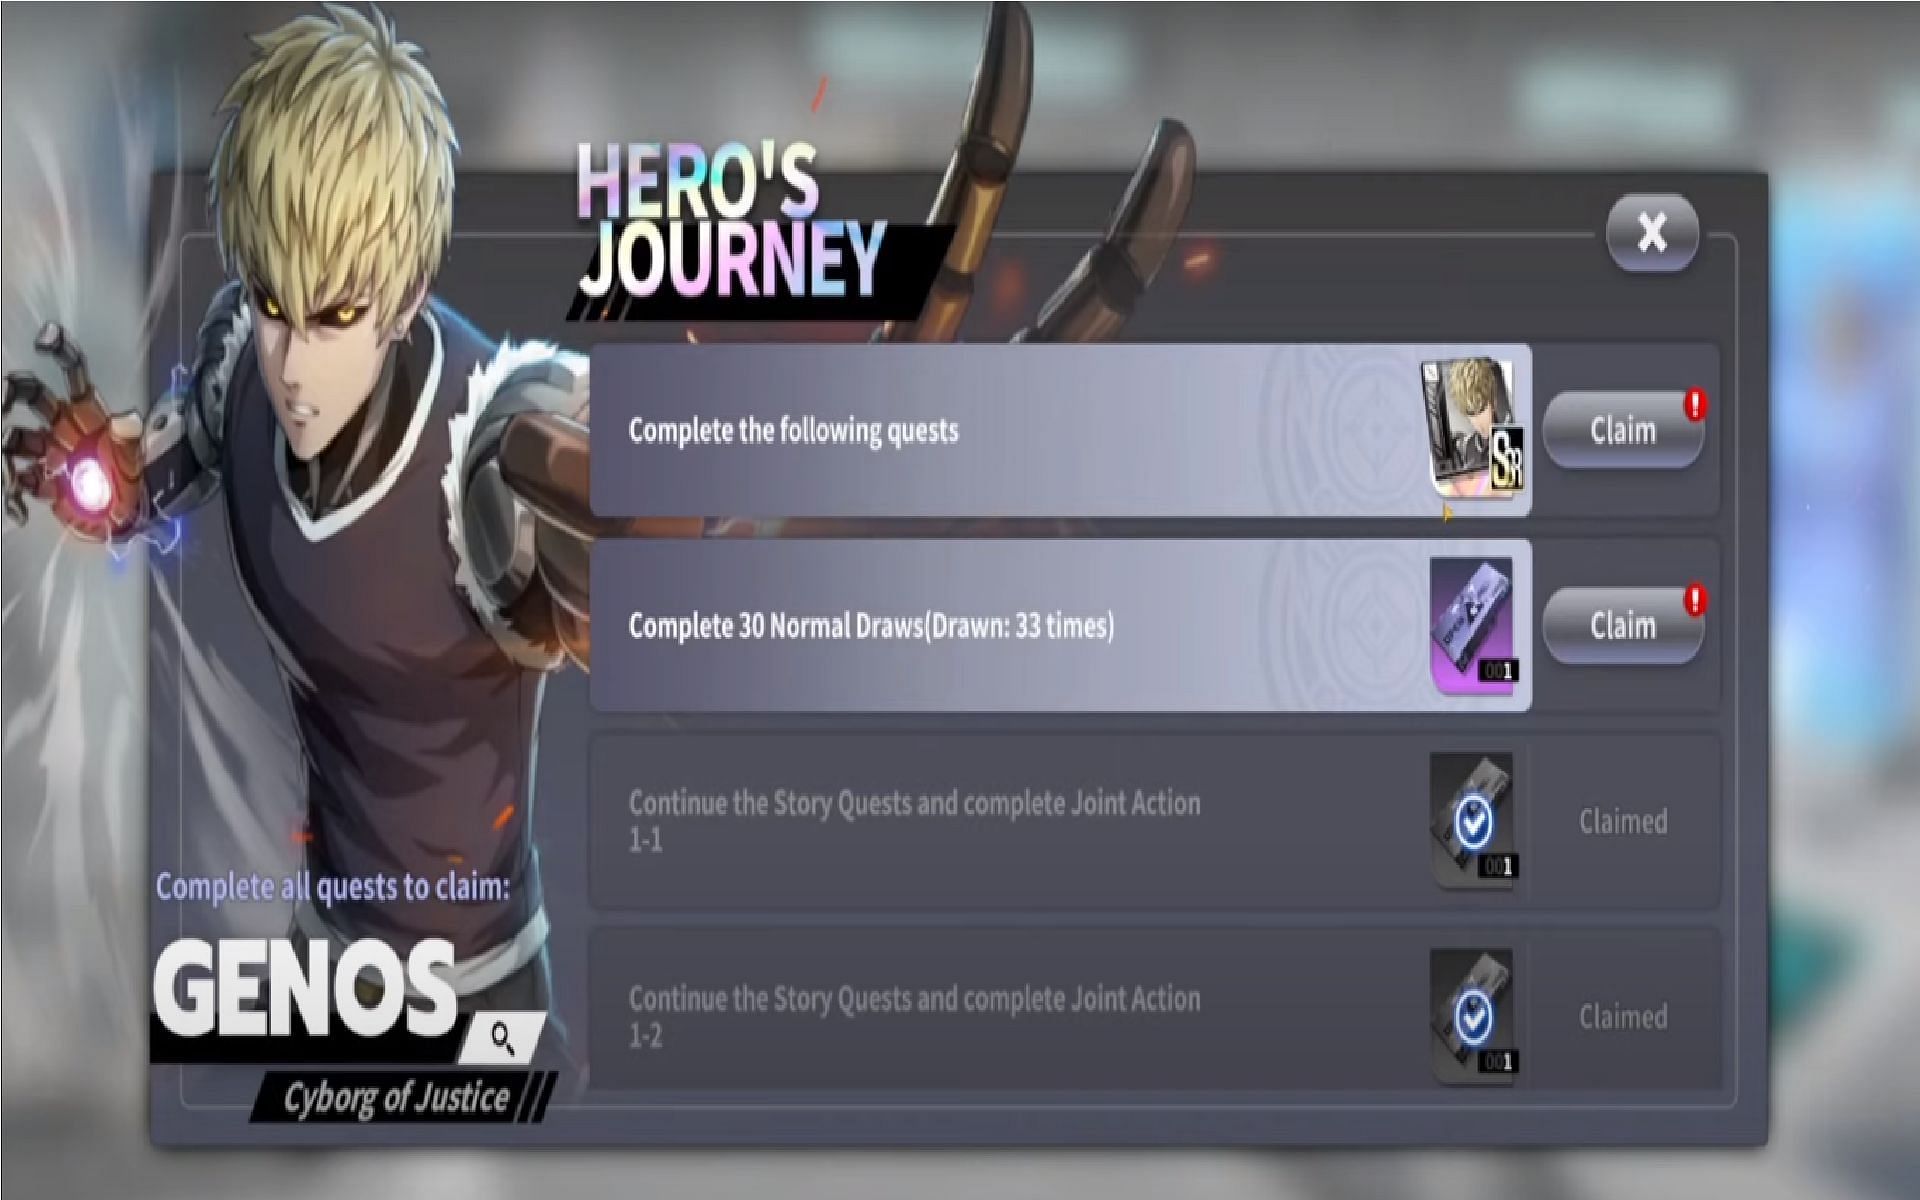 get free Genos by completing this event (Image via T3 Studio)